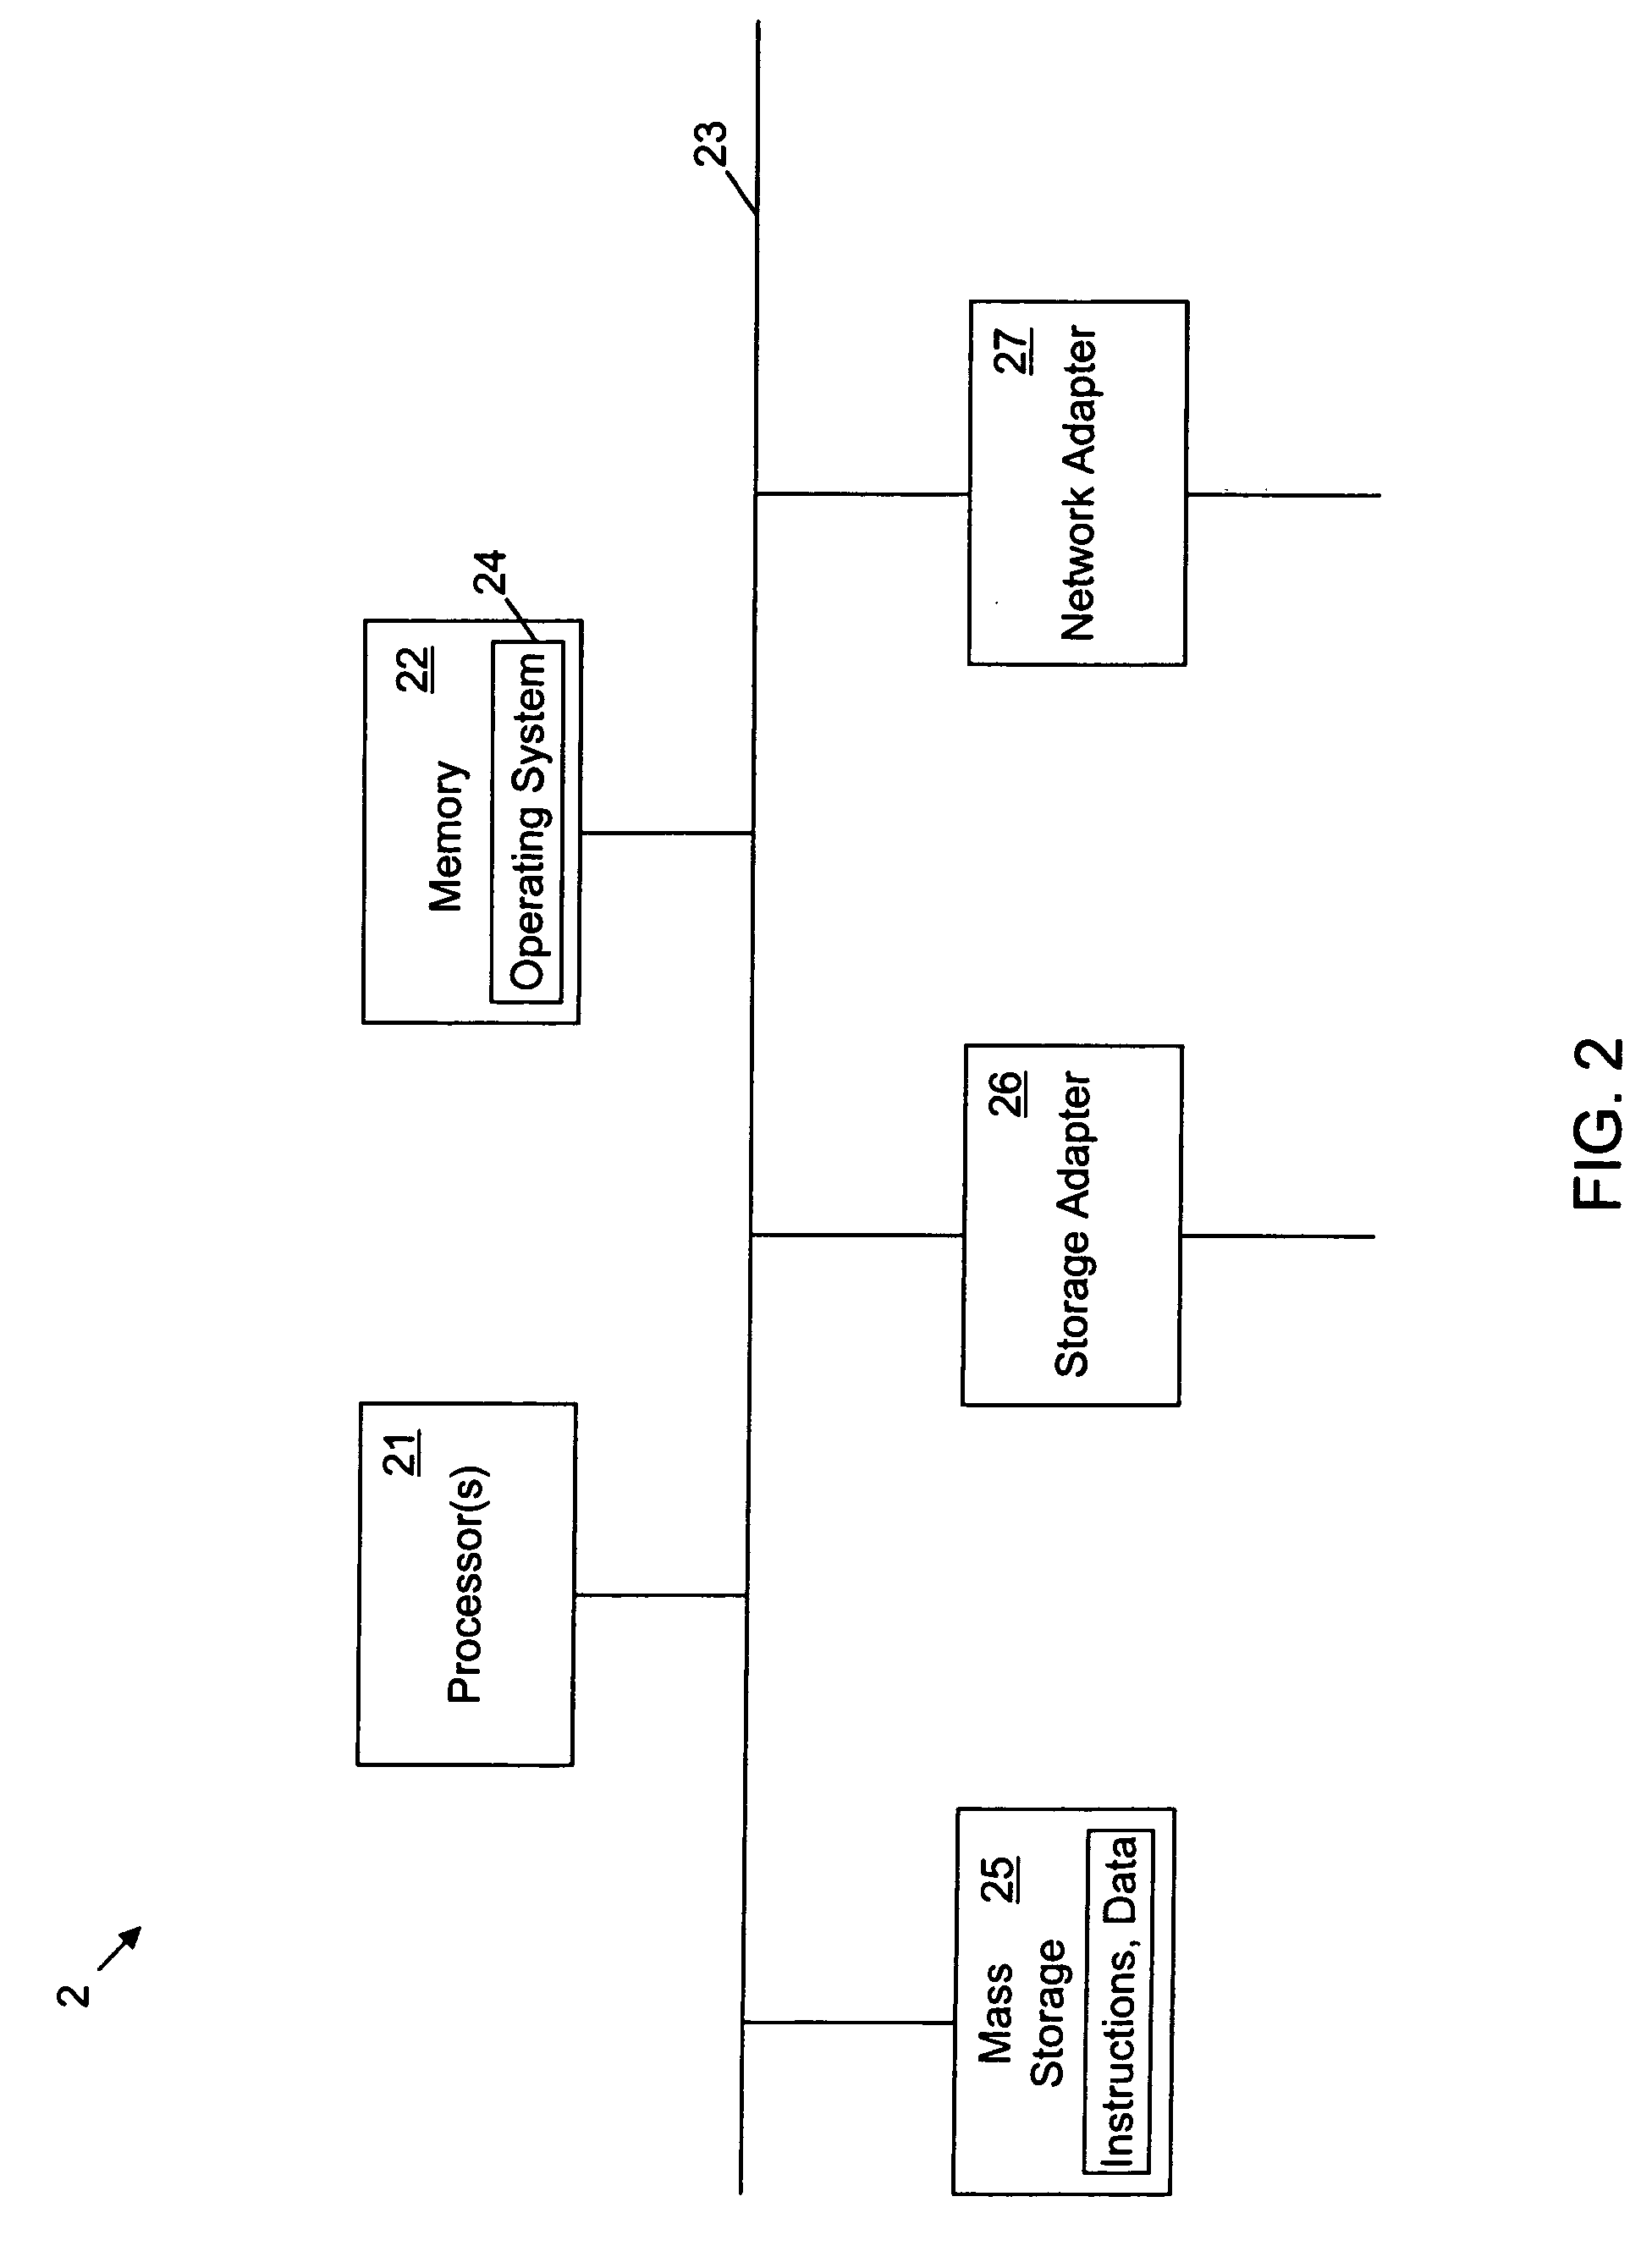 Method and apparatus for generating and describing block-level difference information about two snapshots